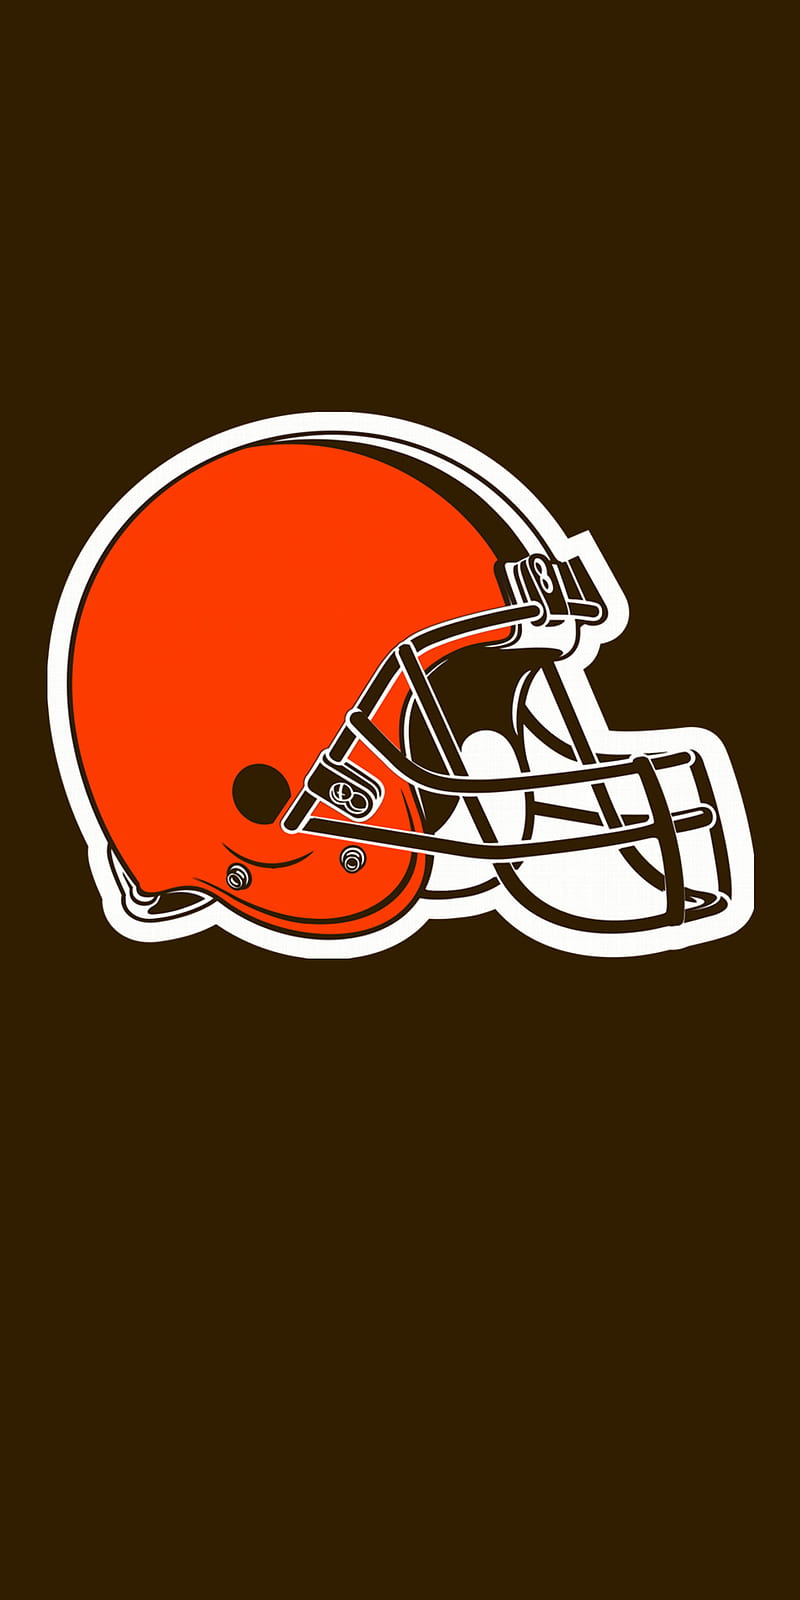 Cleveland Browns wallpaper iPhone  Cleveland browns wallpaper, Cleveland  browns, Cleveland browns logo